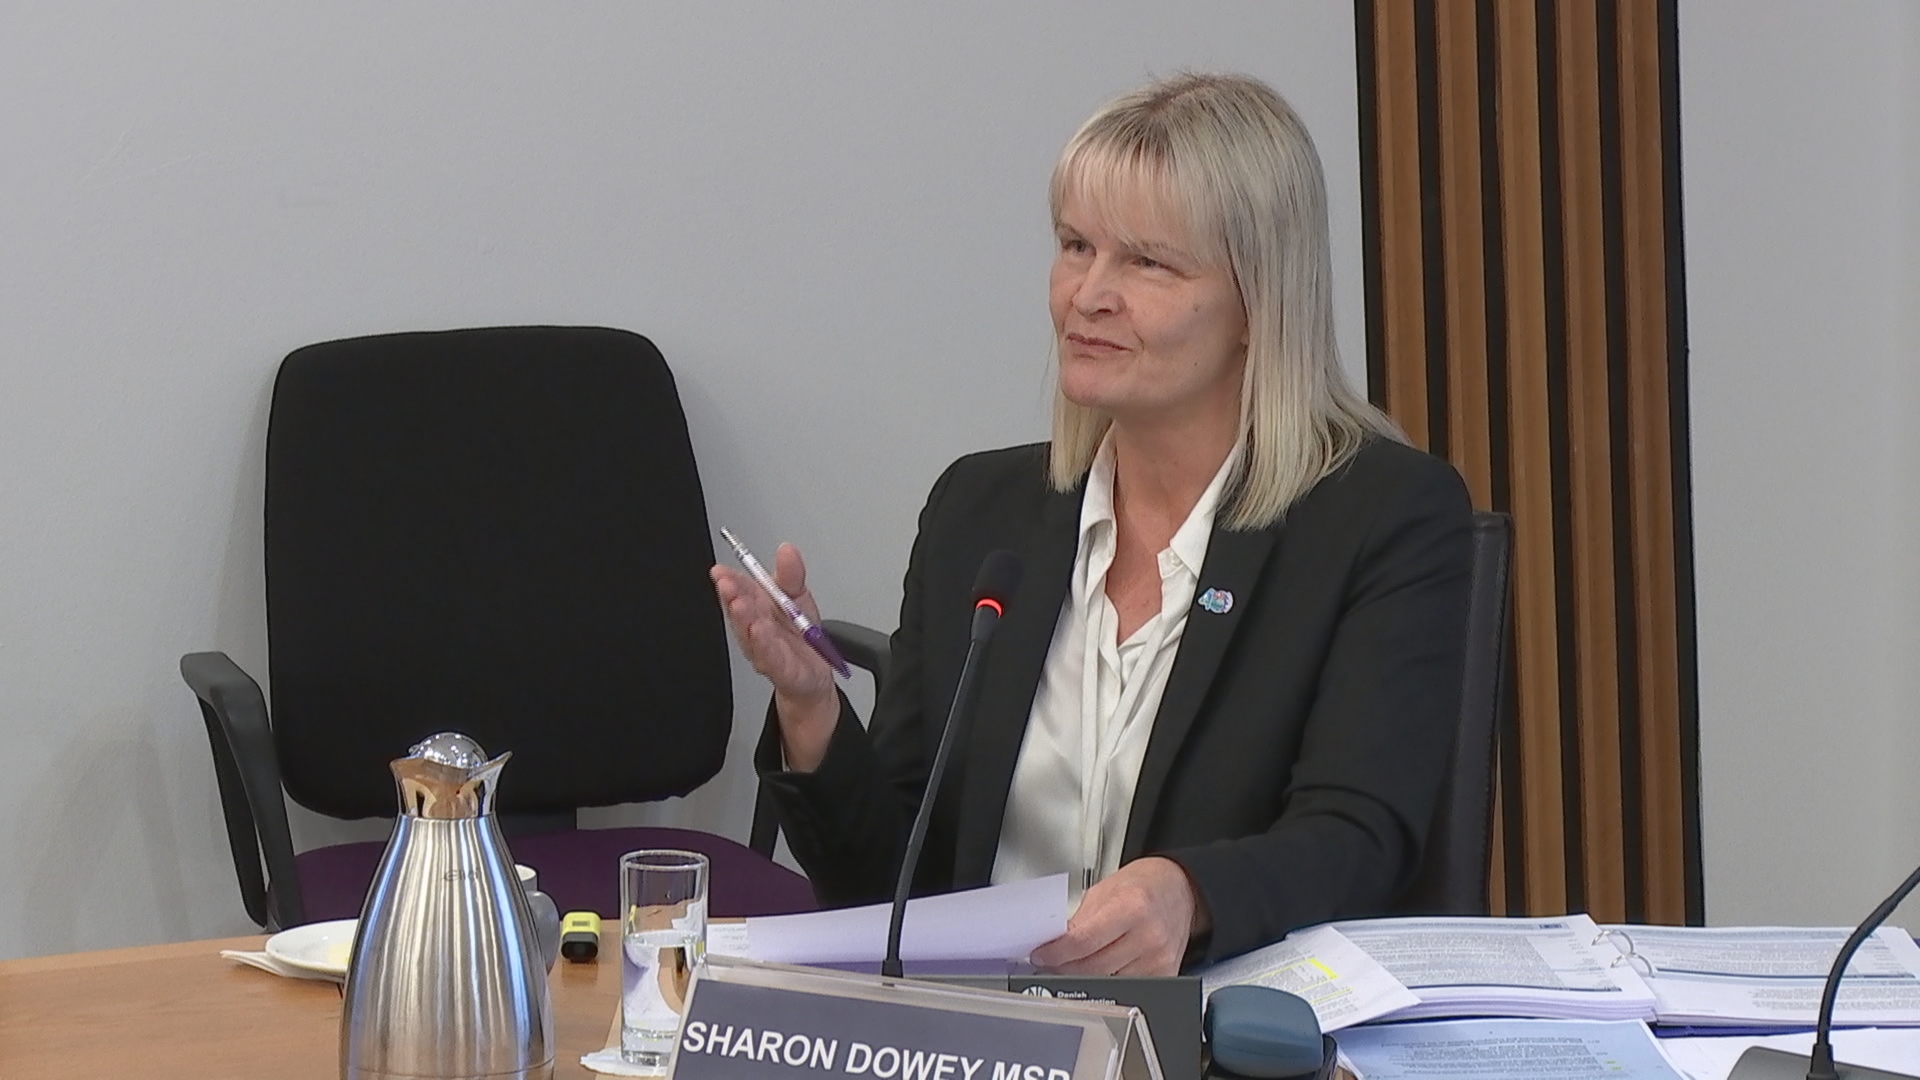 Scottish Conservative MSP Sharon Dowey asked if there was a 'last minute rush'. (Scottish Parliament TV)